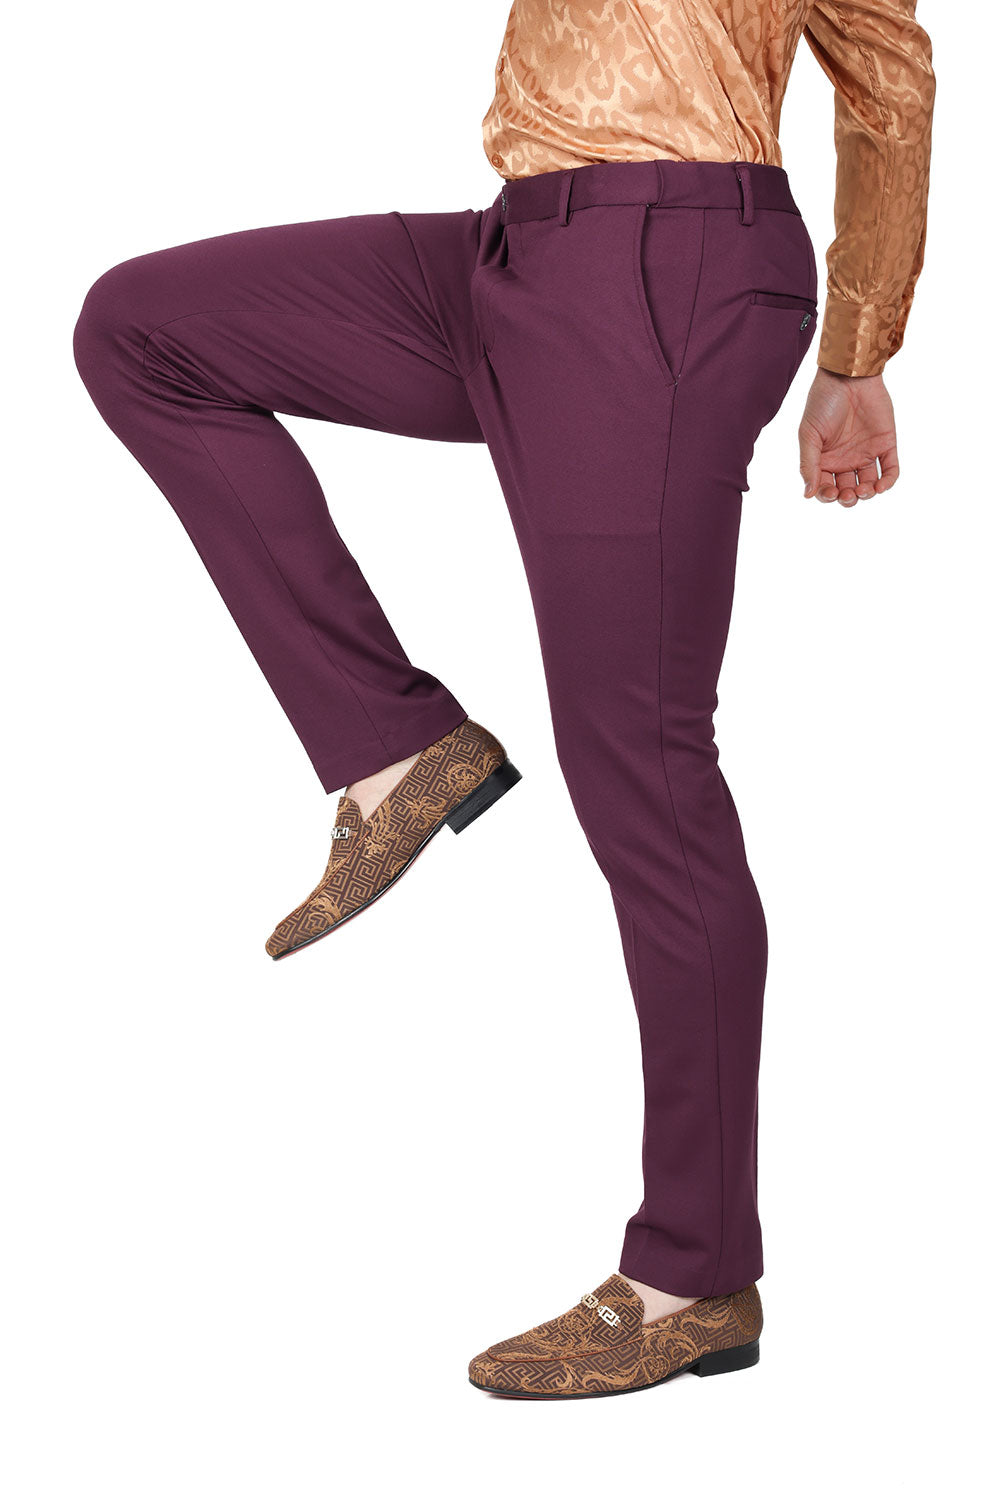 Barabas Men's Solid Color Essential Chino Dress Stretch Pants CP4007 Plum